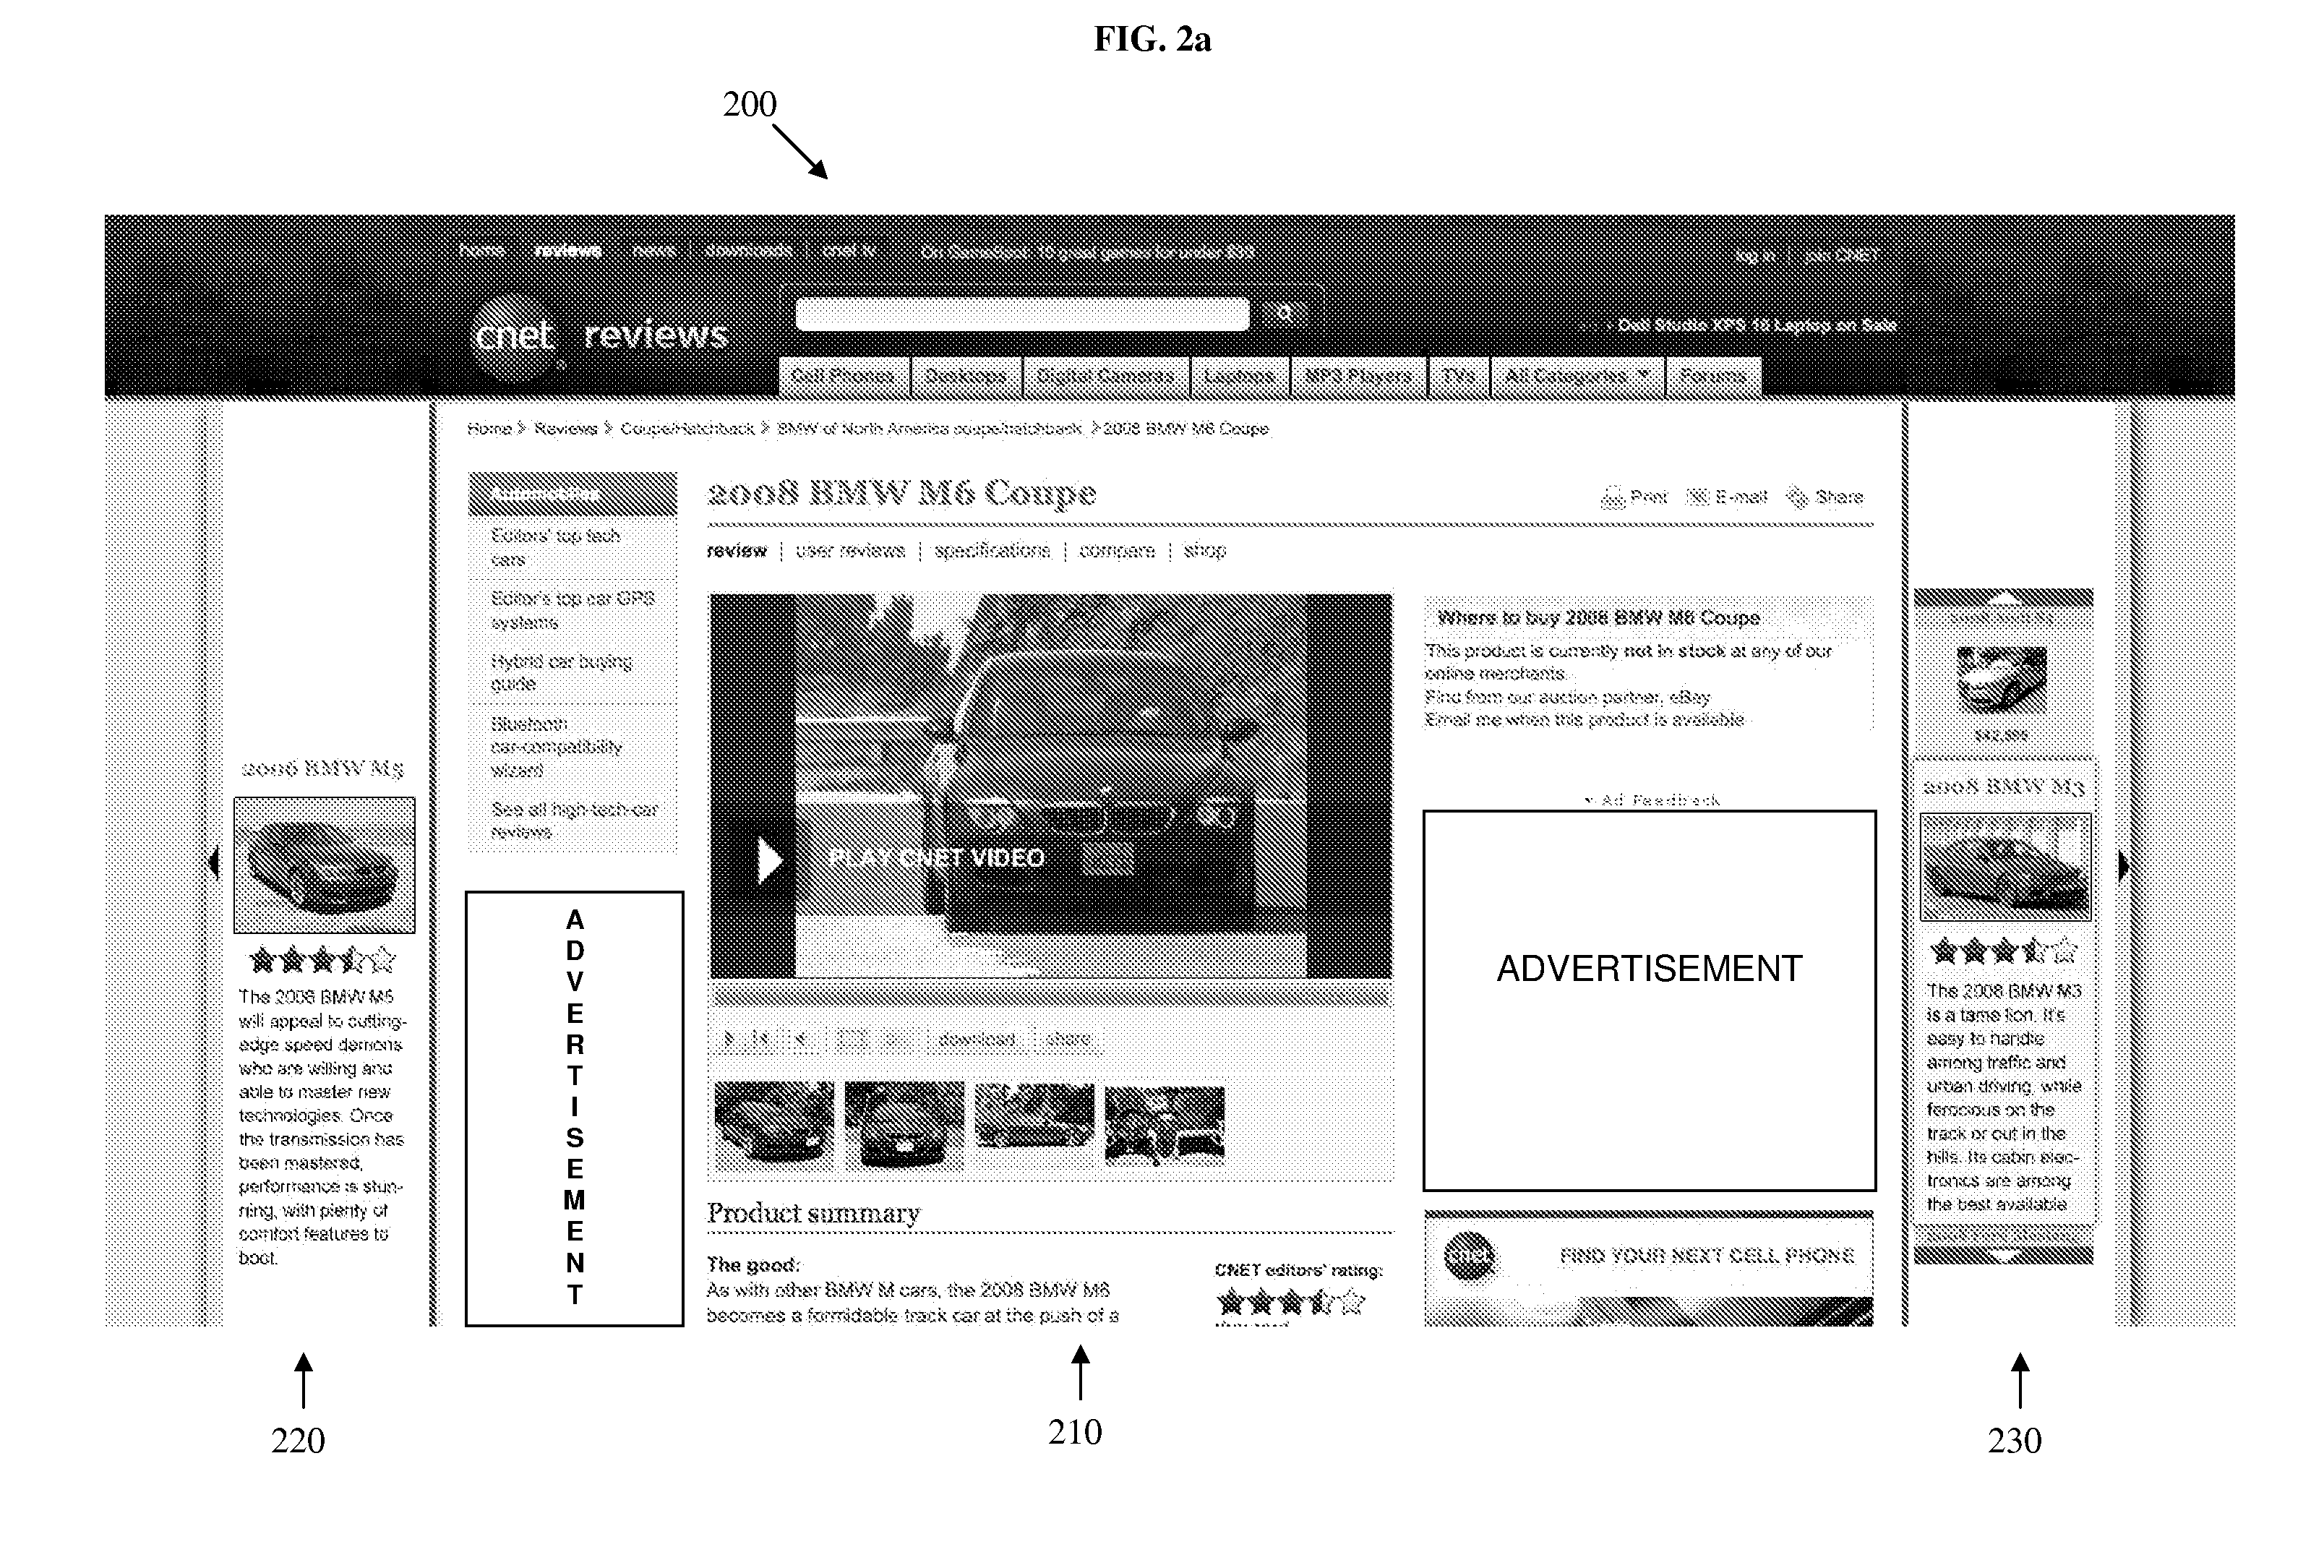 System and method for navigating a collection of editorial content